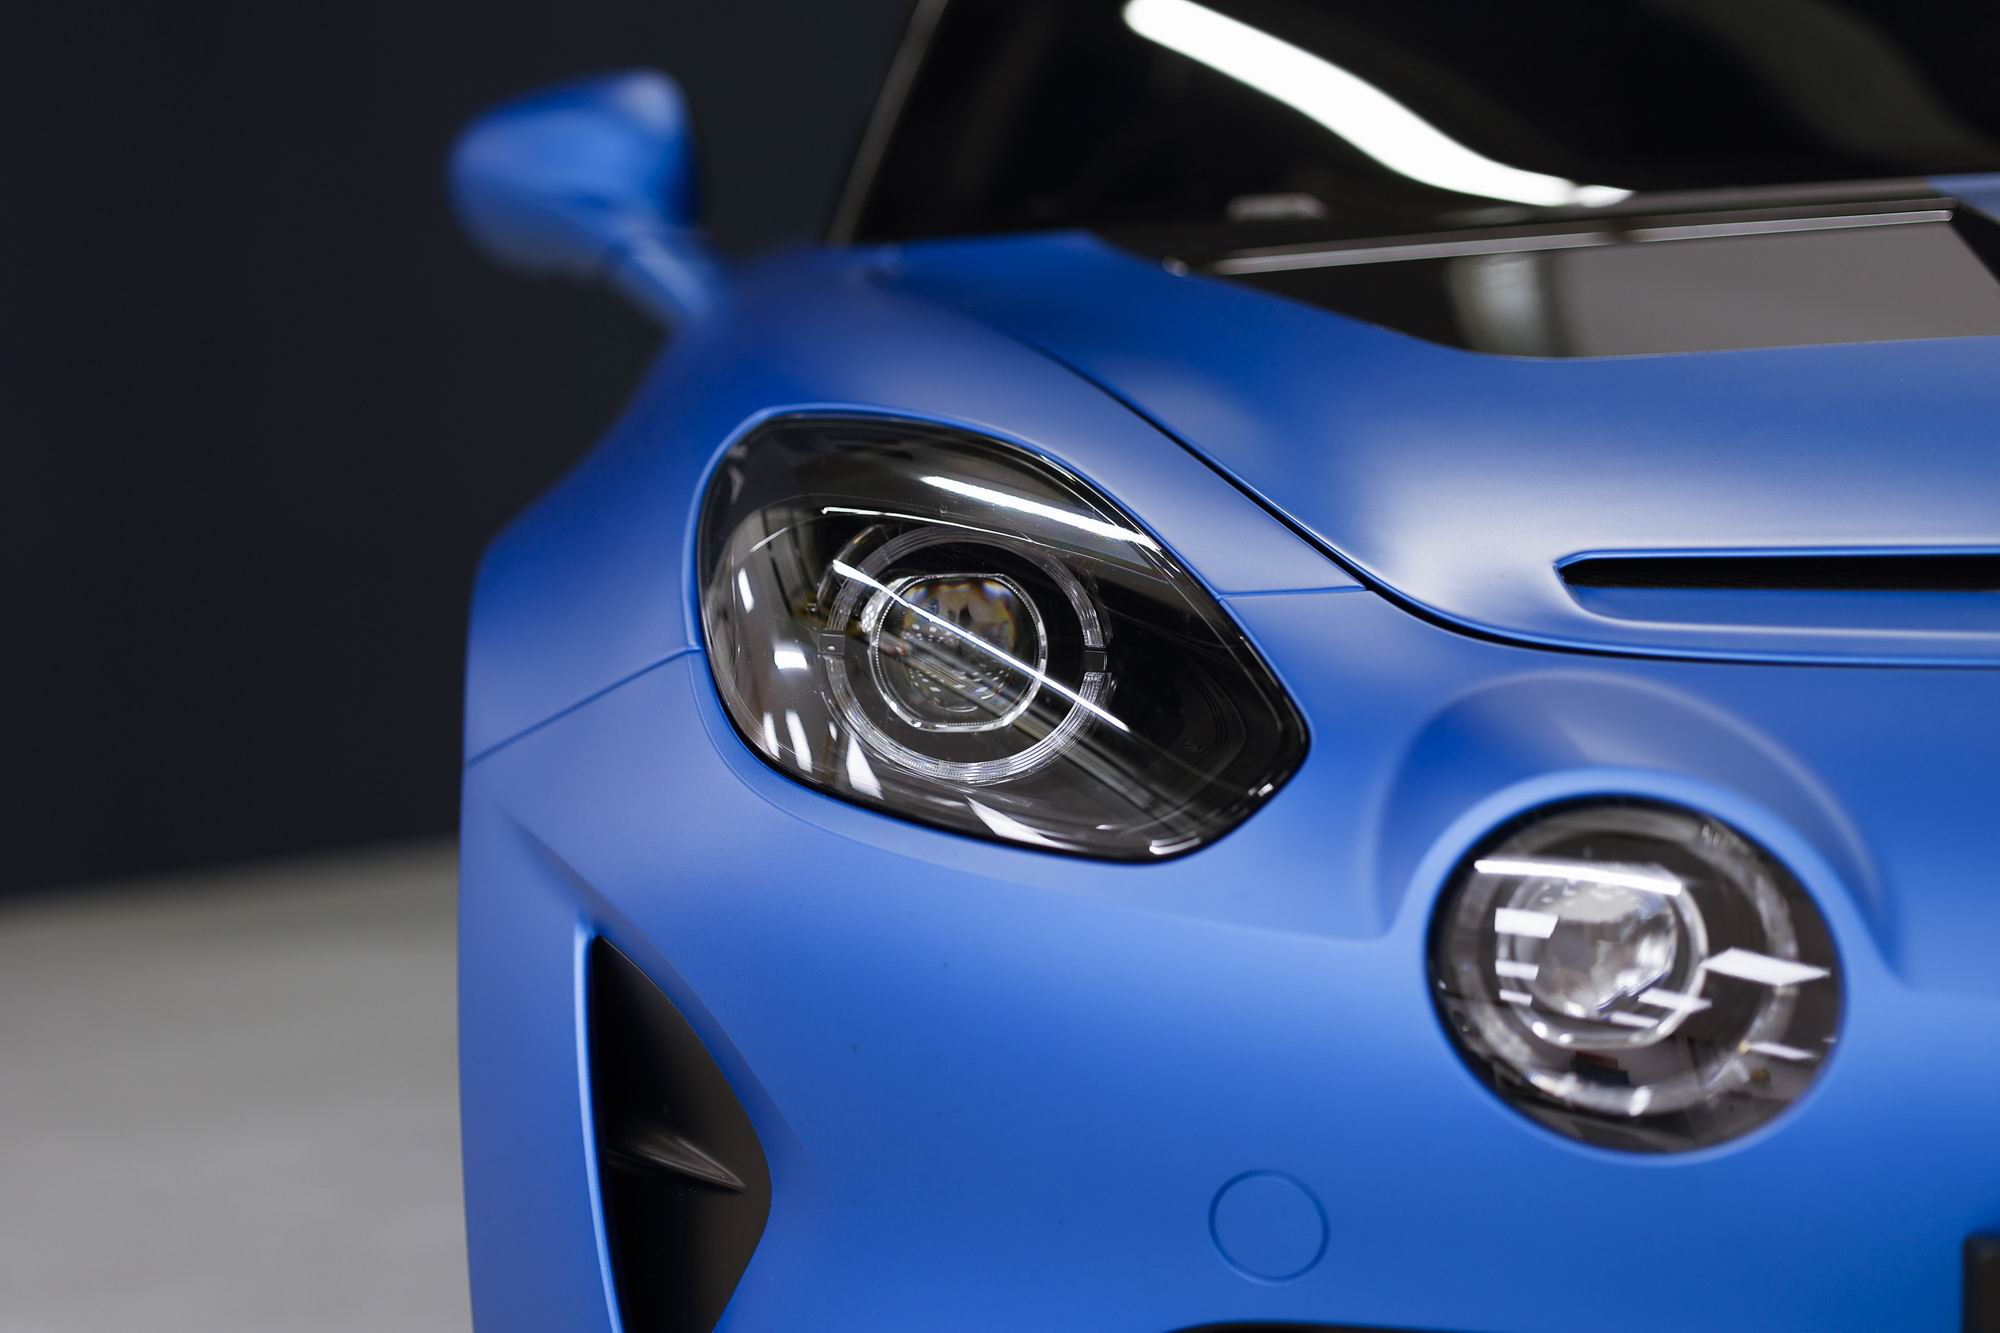 This is the lightweight, track-ready Alpine A110 R